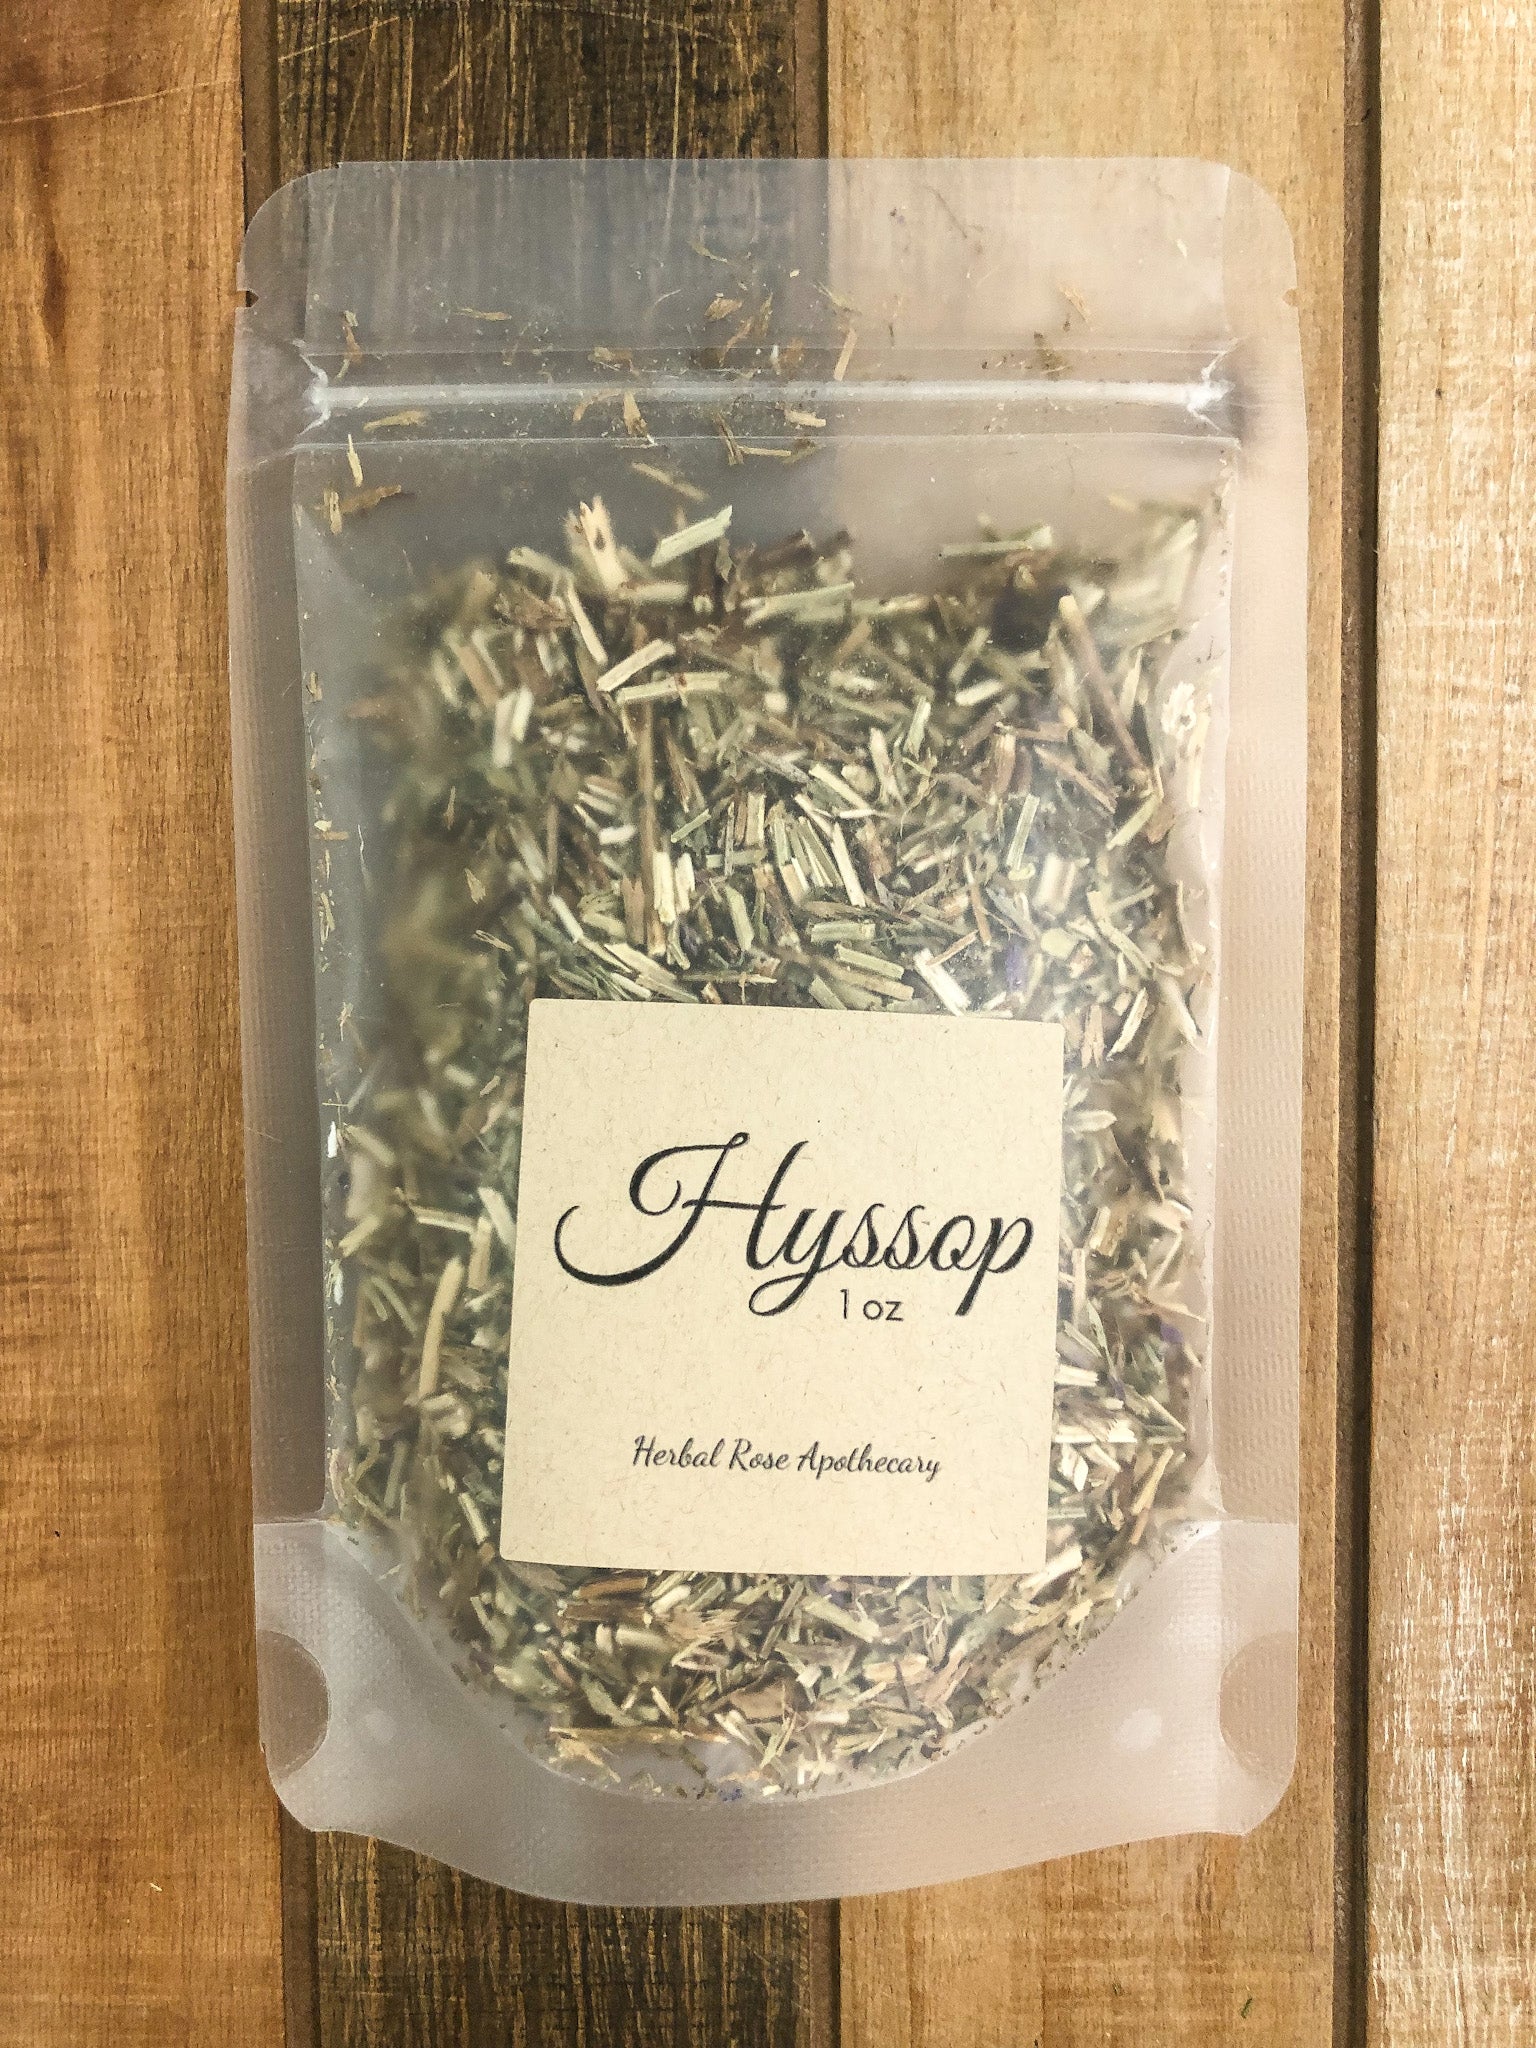 1oz bag of dried hyssop in a clear plastic bag with a wooden background